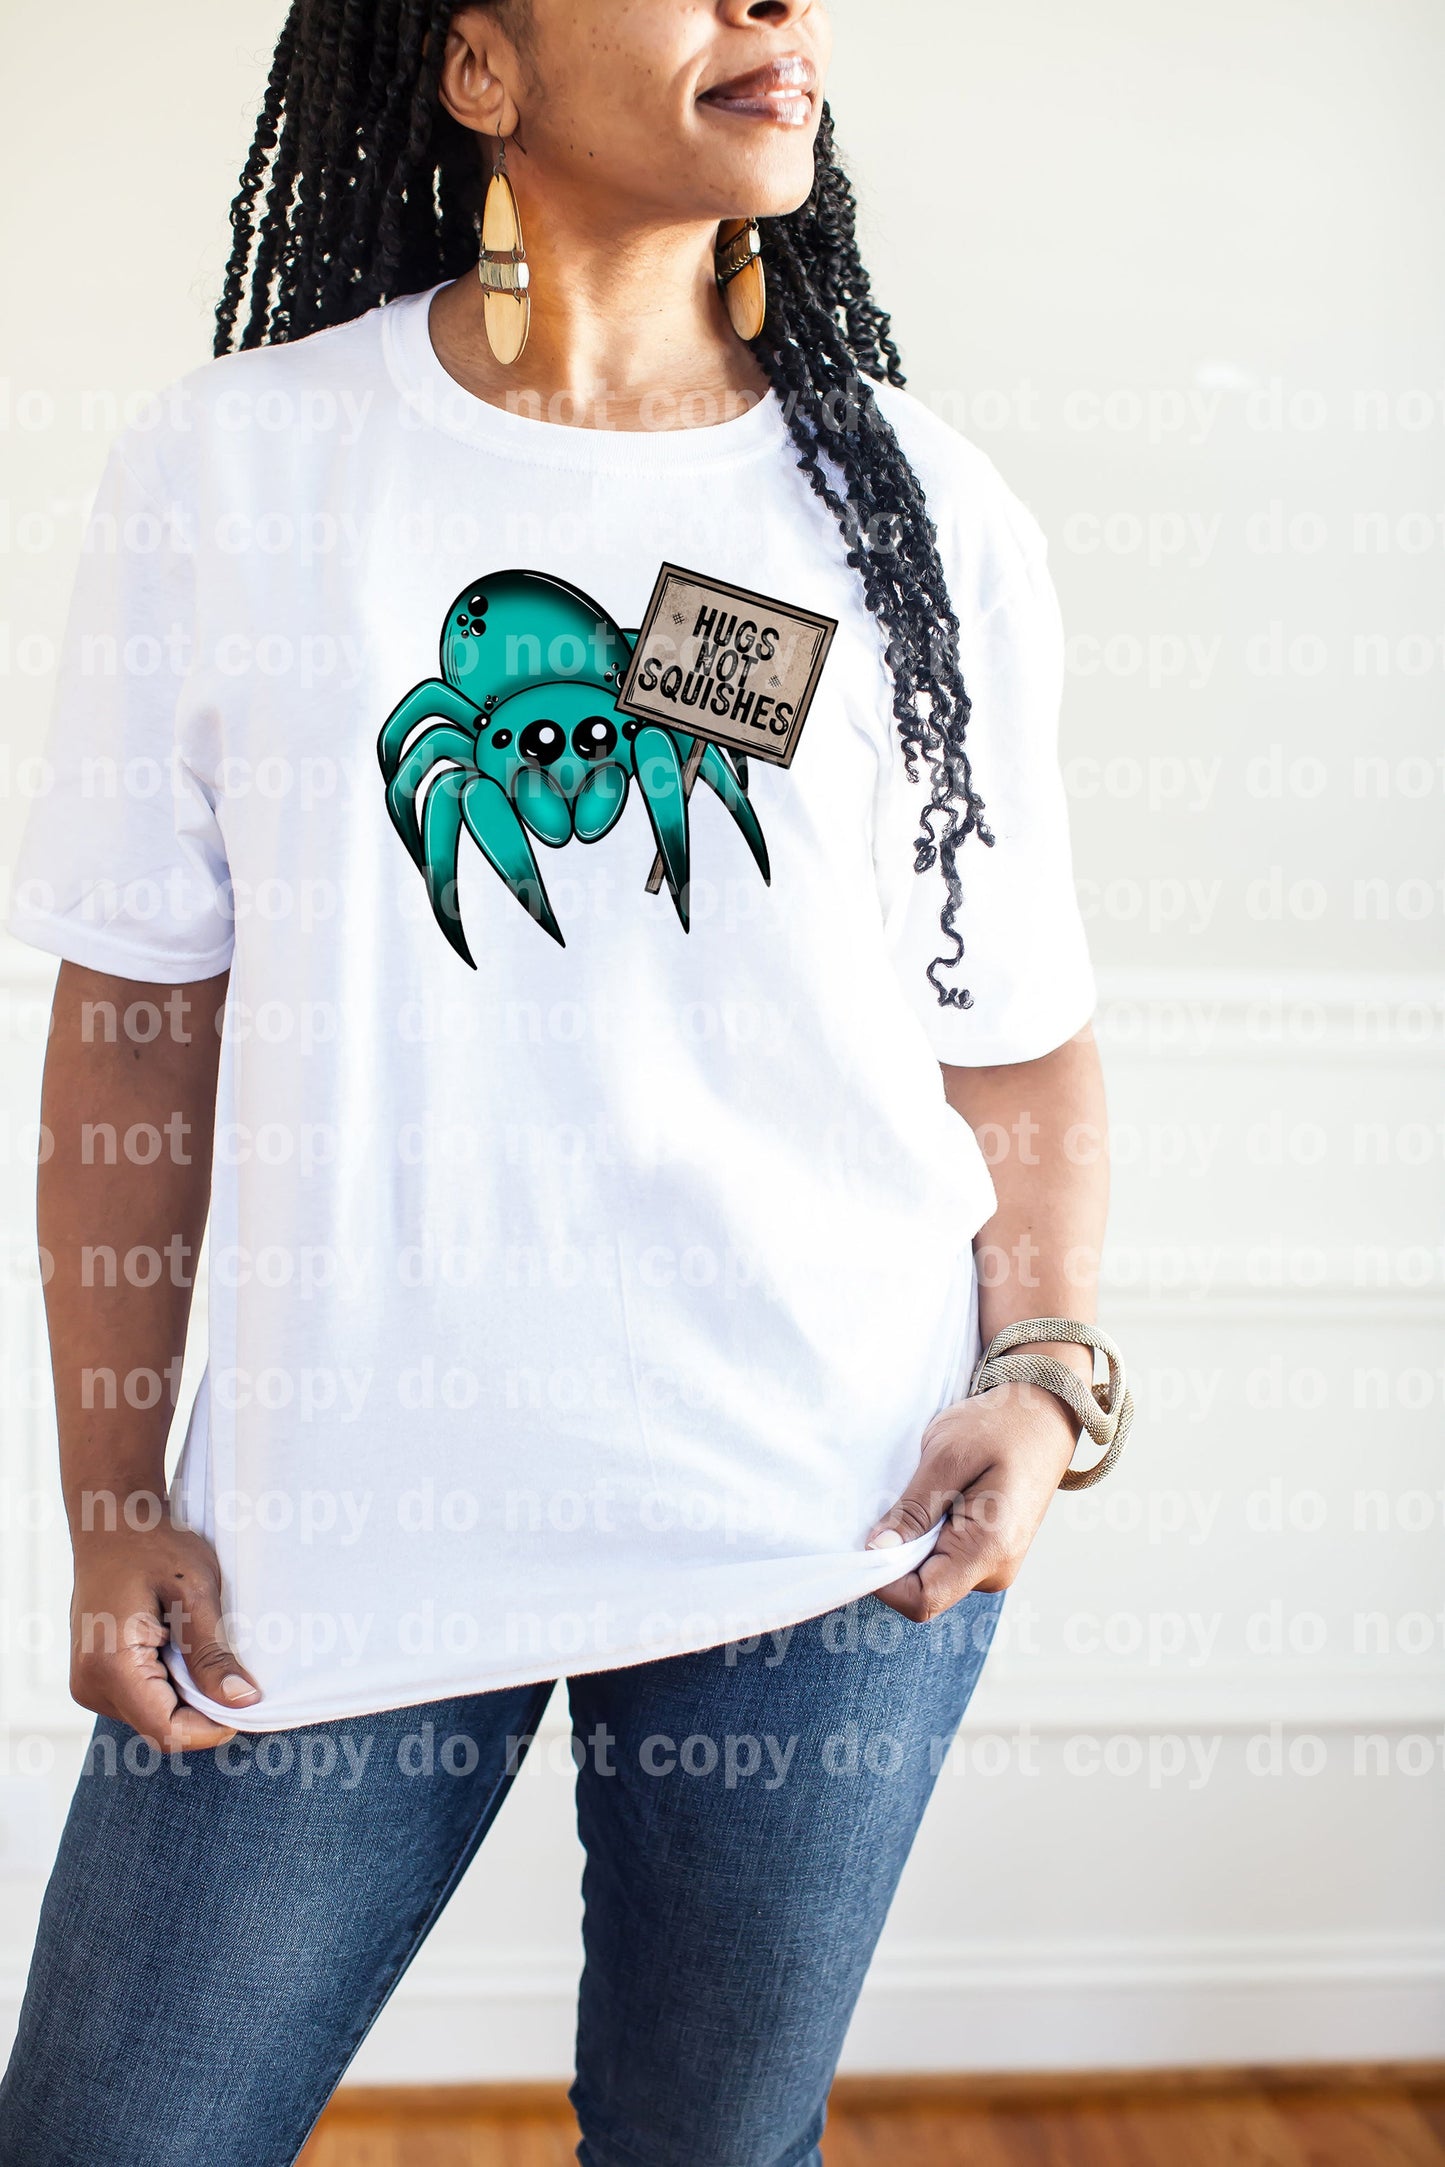 Hugs Not Squishes Dream Print or Sublimation Print